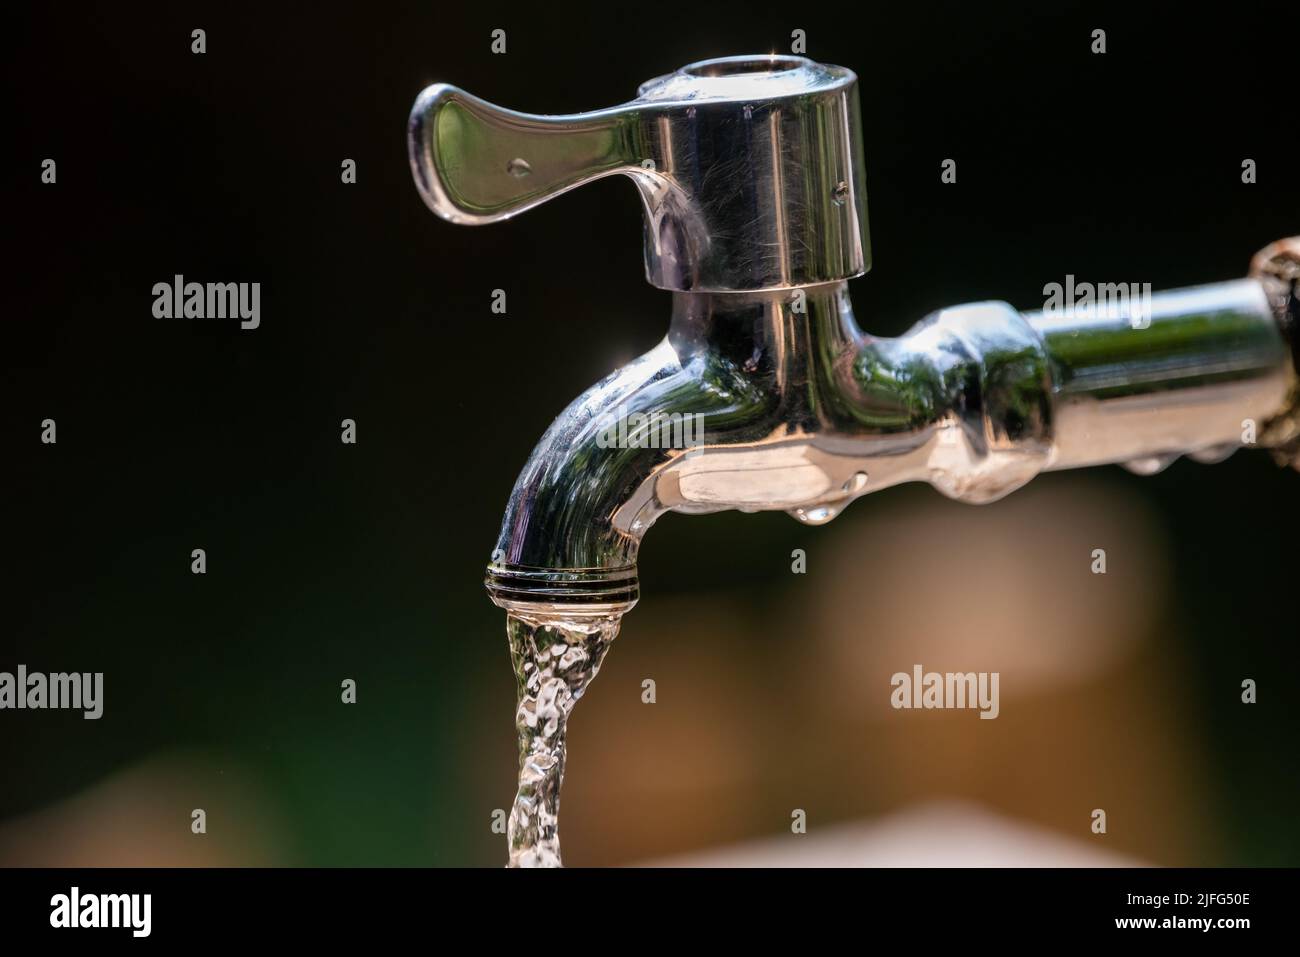 Outdoor chrome faucet running water close-up view Stock Photo